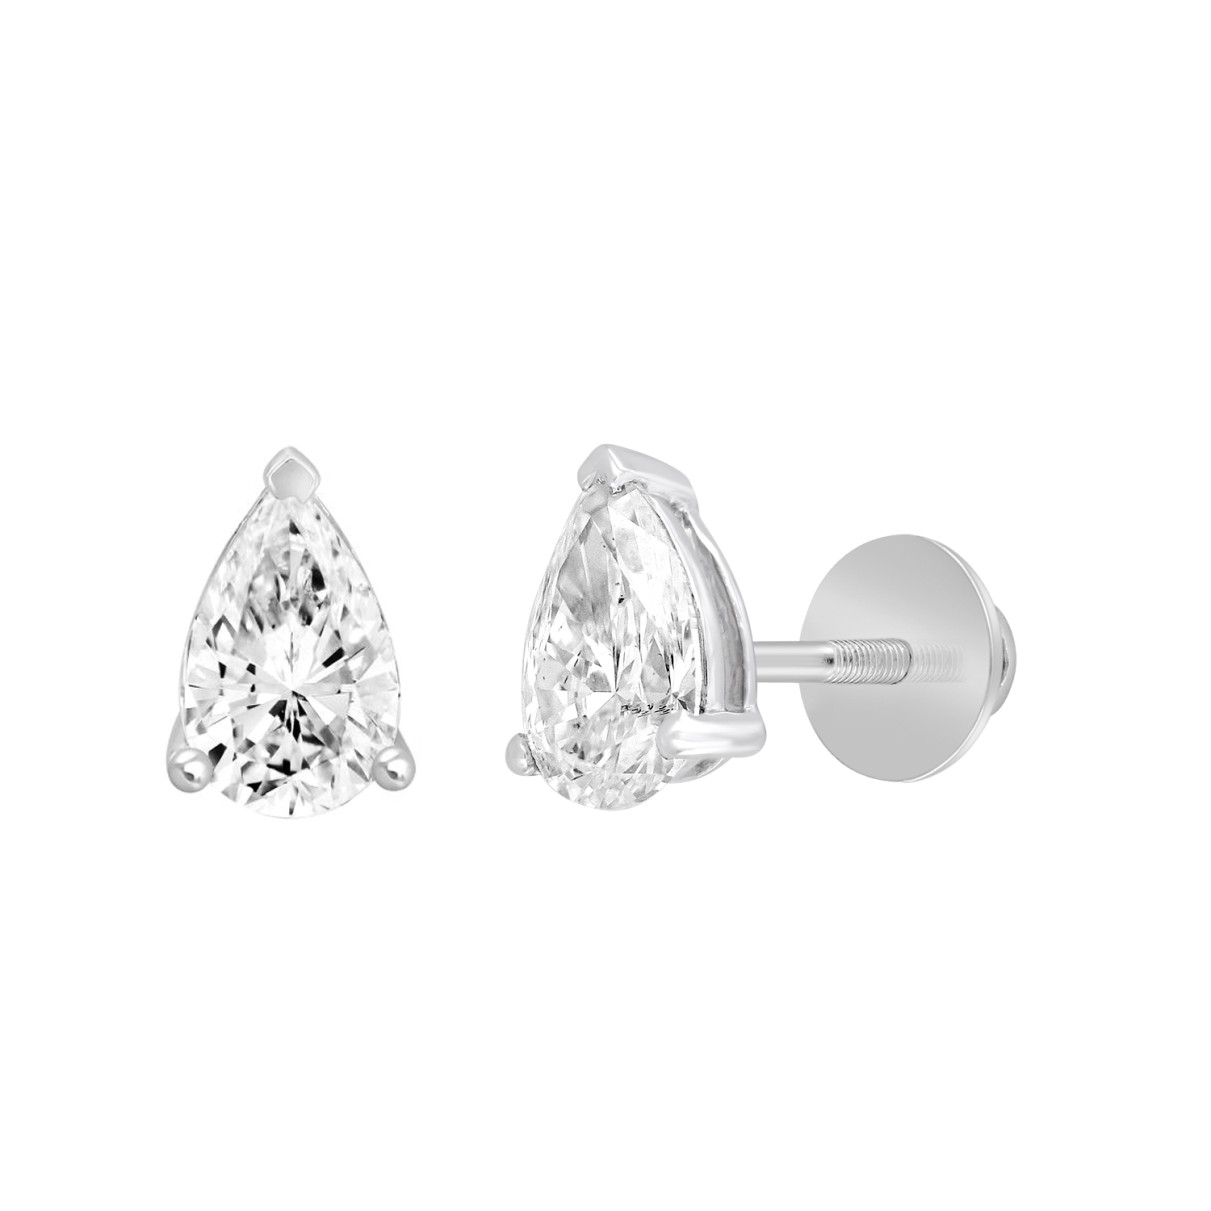 LADIES SOLITAIRE EARRINGS 1 1/2CT PEAR DIAMOND 14K WHITE GOLD